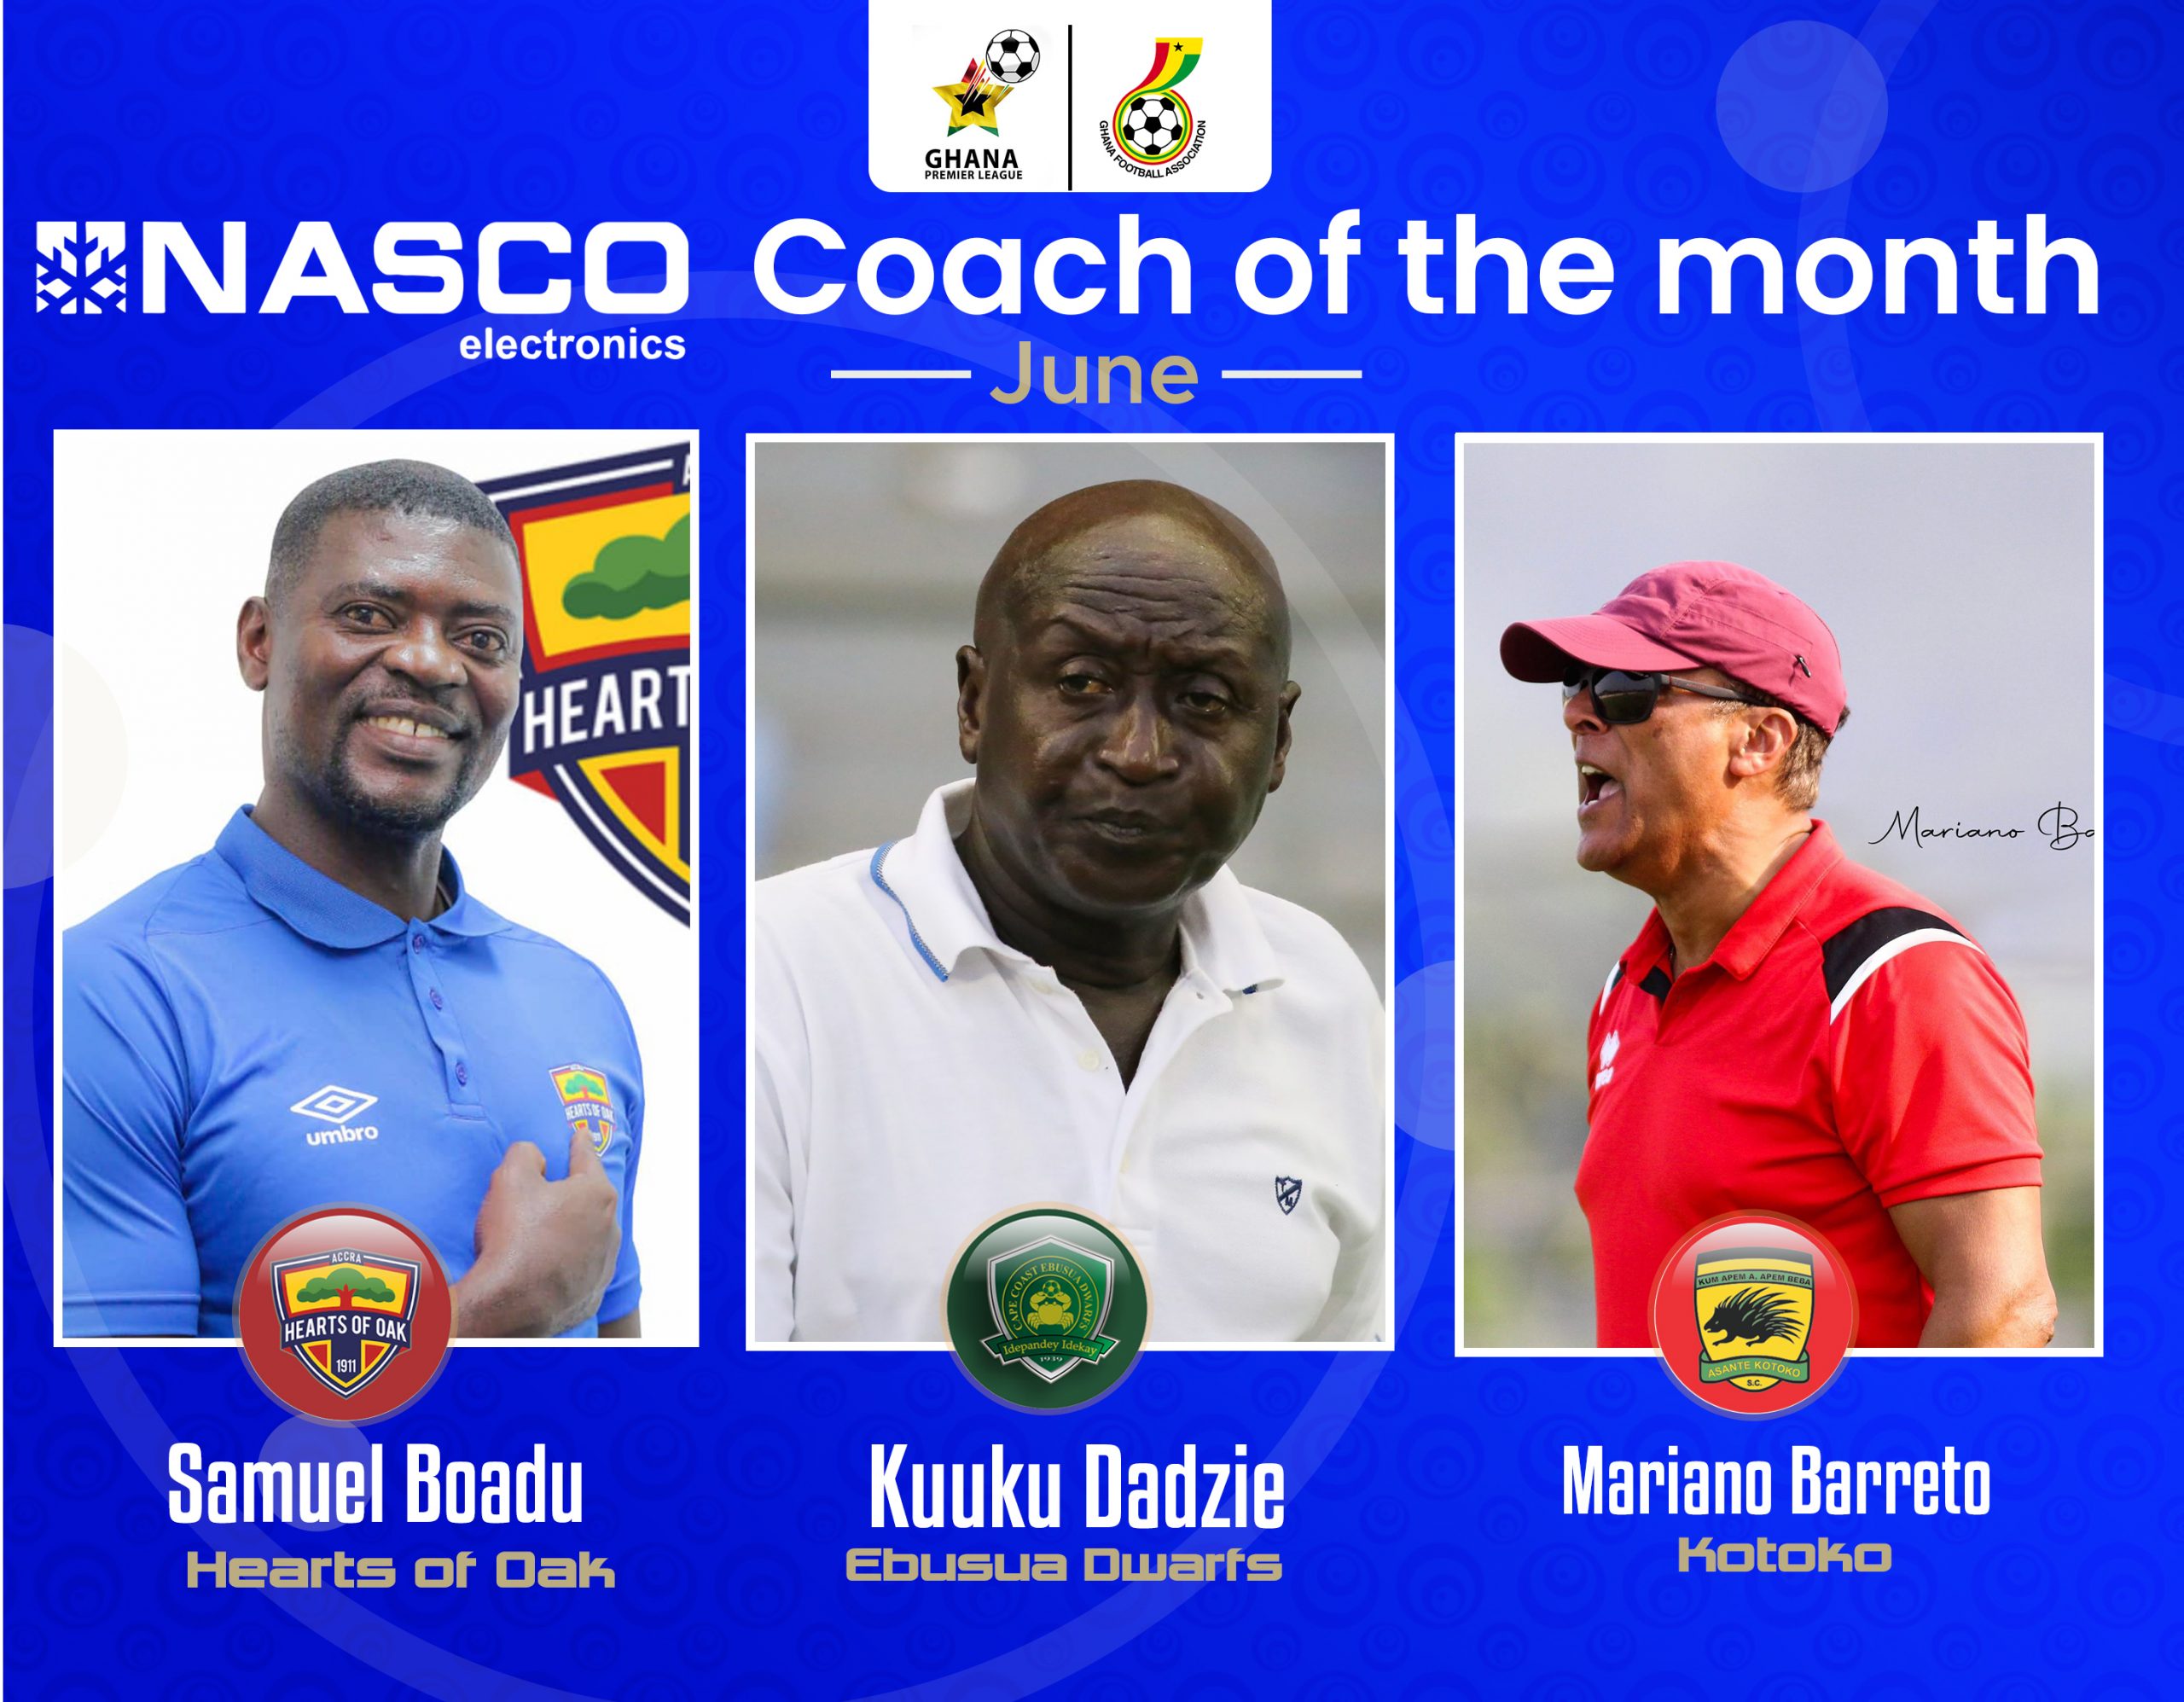 Samuel Boadu and two others nominated for NASCO Coach of the Month award